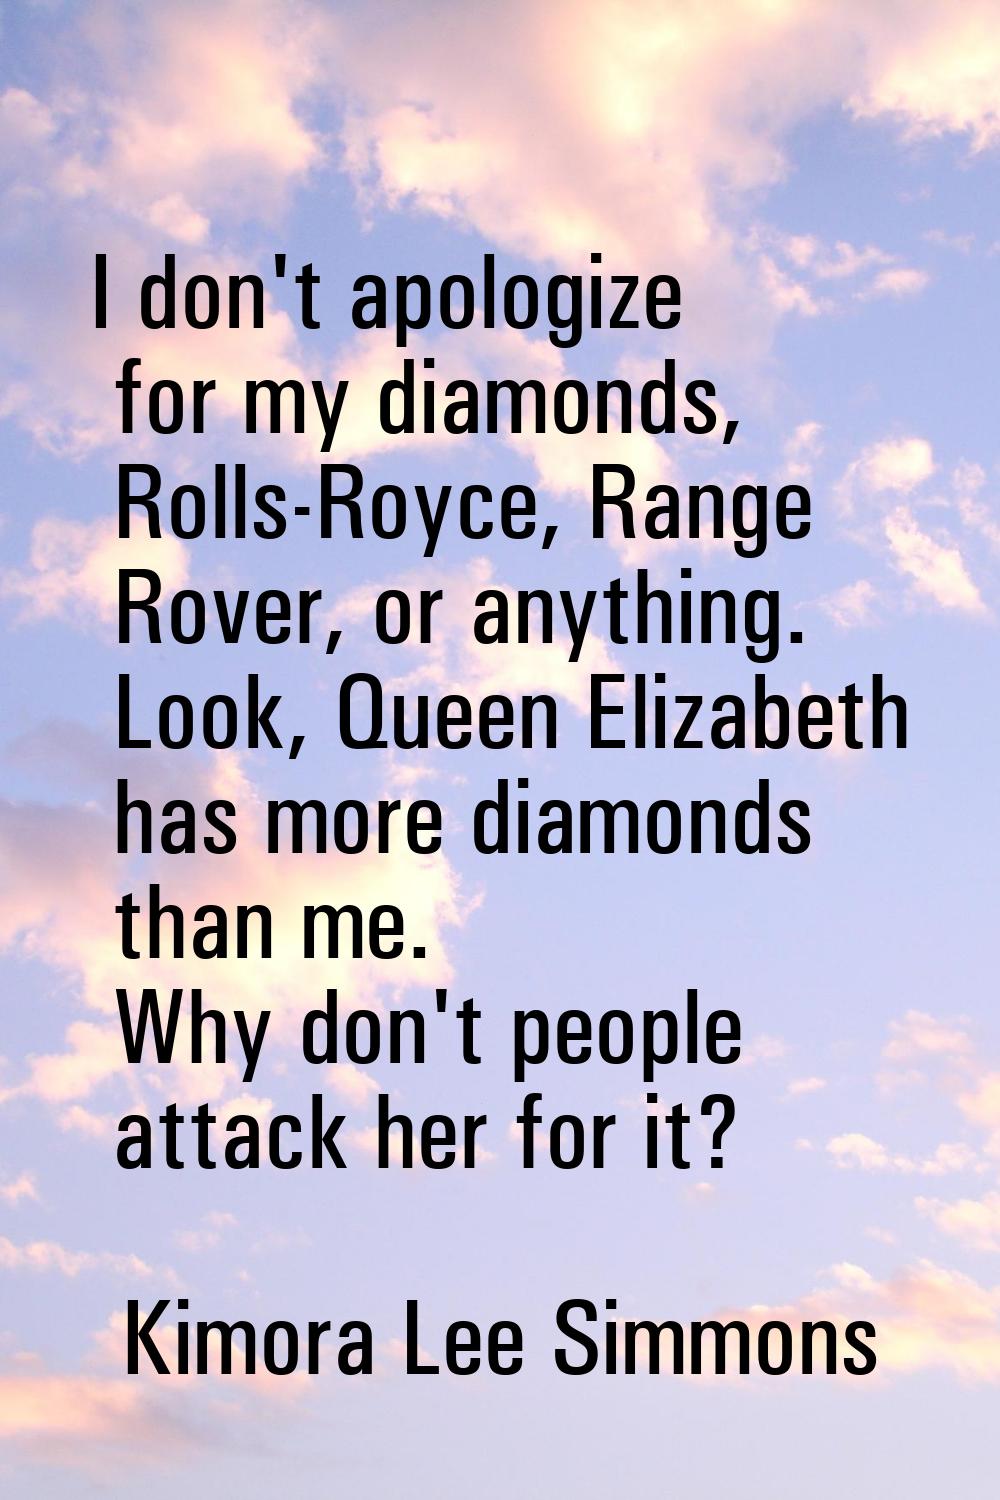 I don't apologize for my diamonds, Rolls-Royce, Range Rover, or anything. Look, Queen Elizabeth has